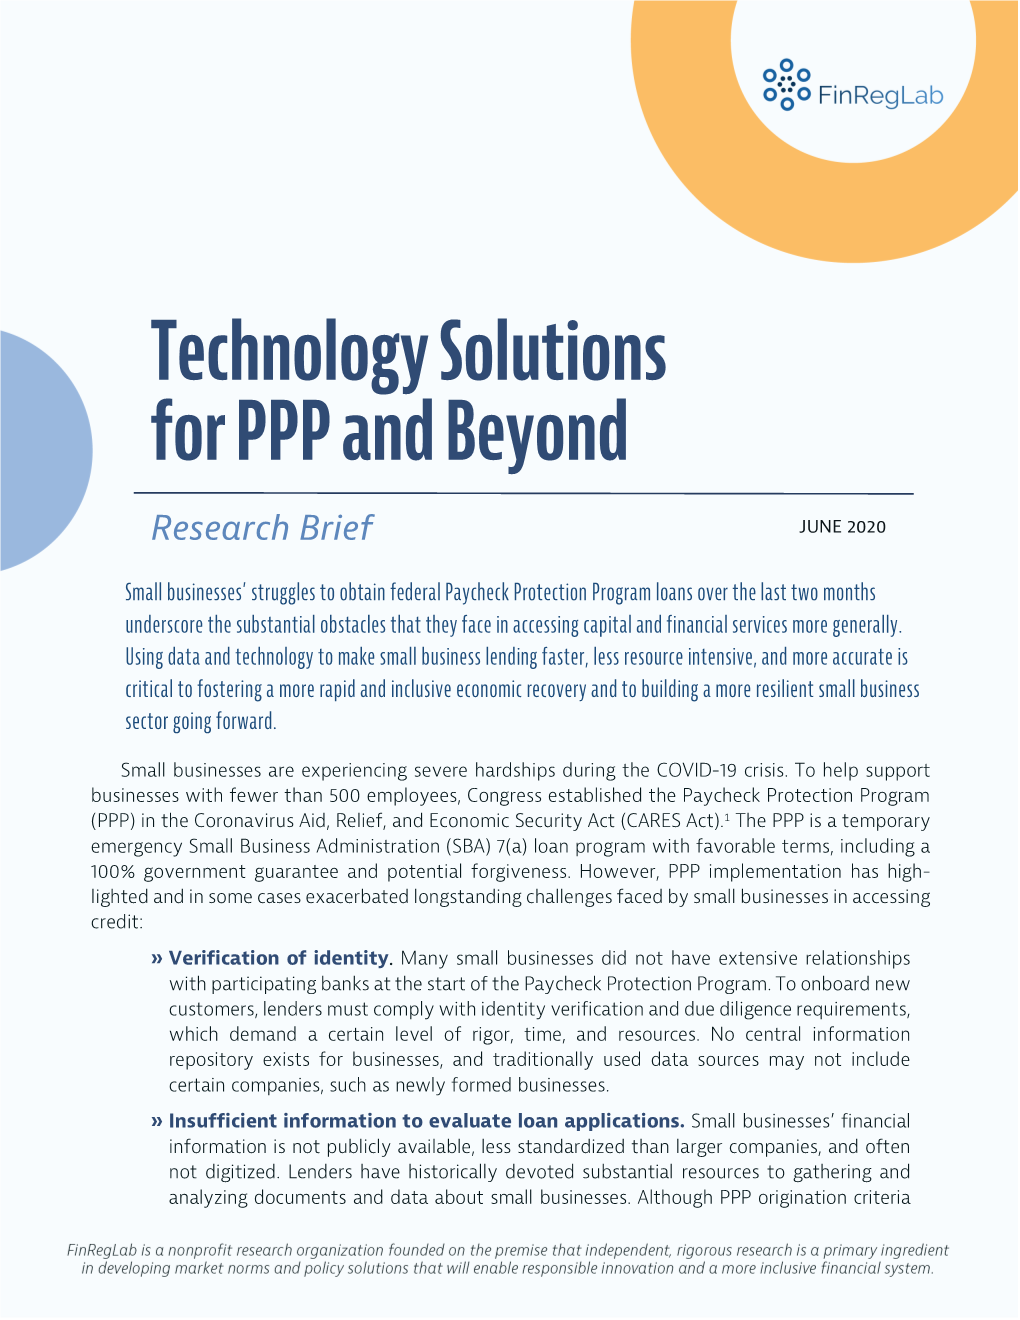 Technology Solutions for PPP and Beyond